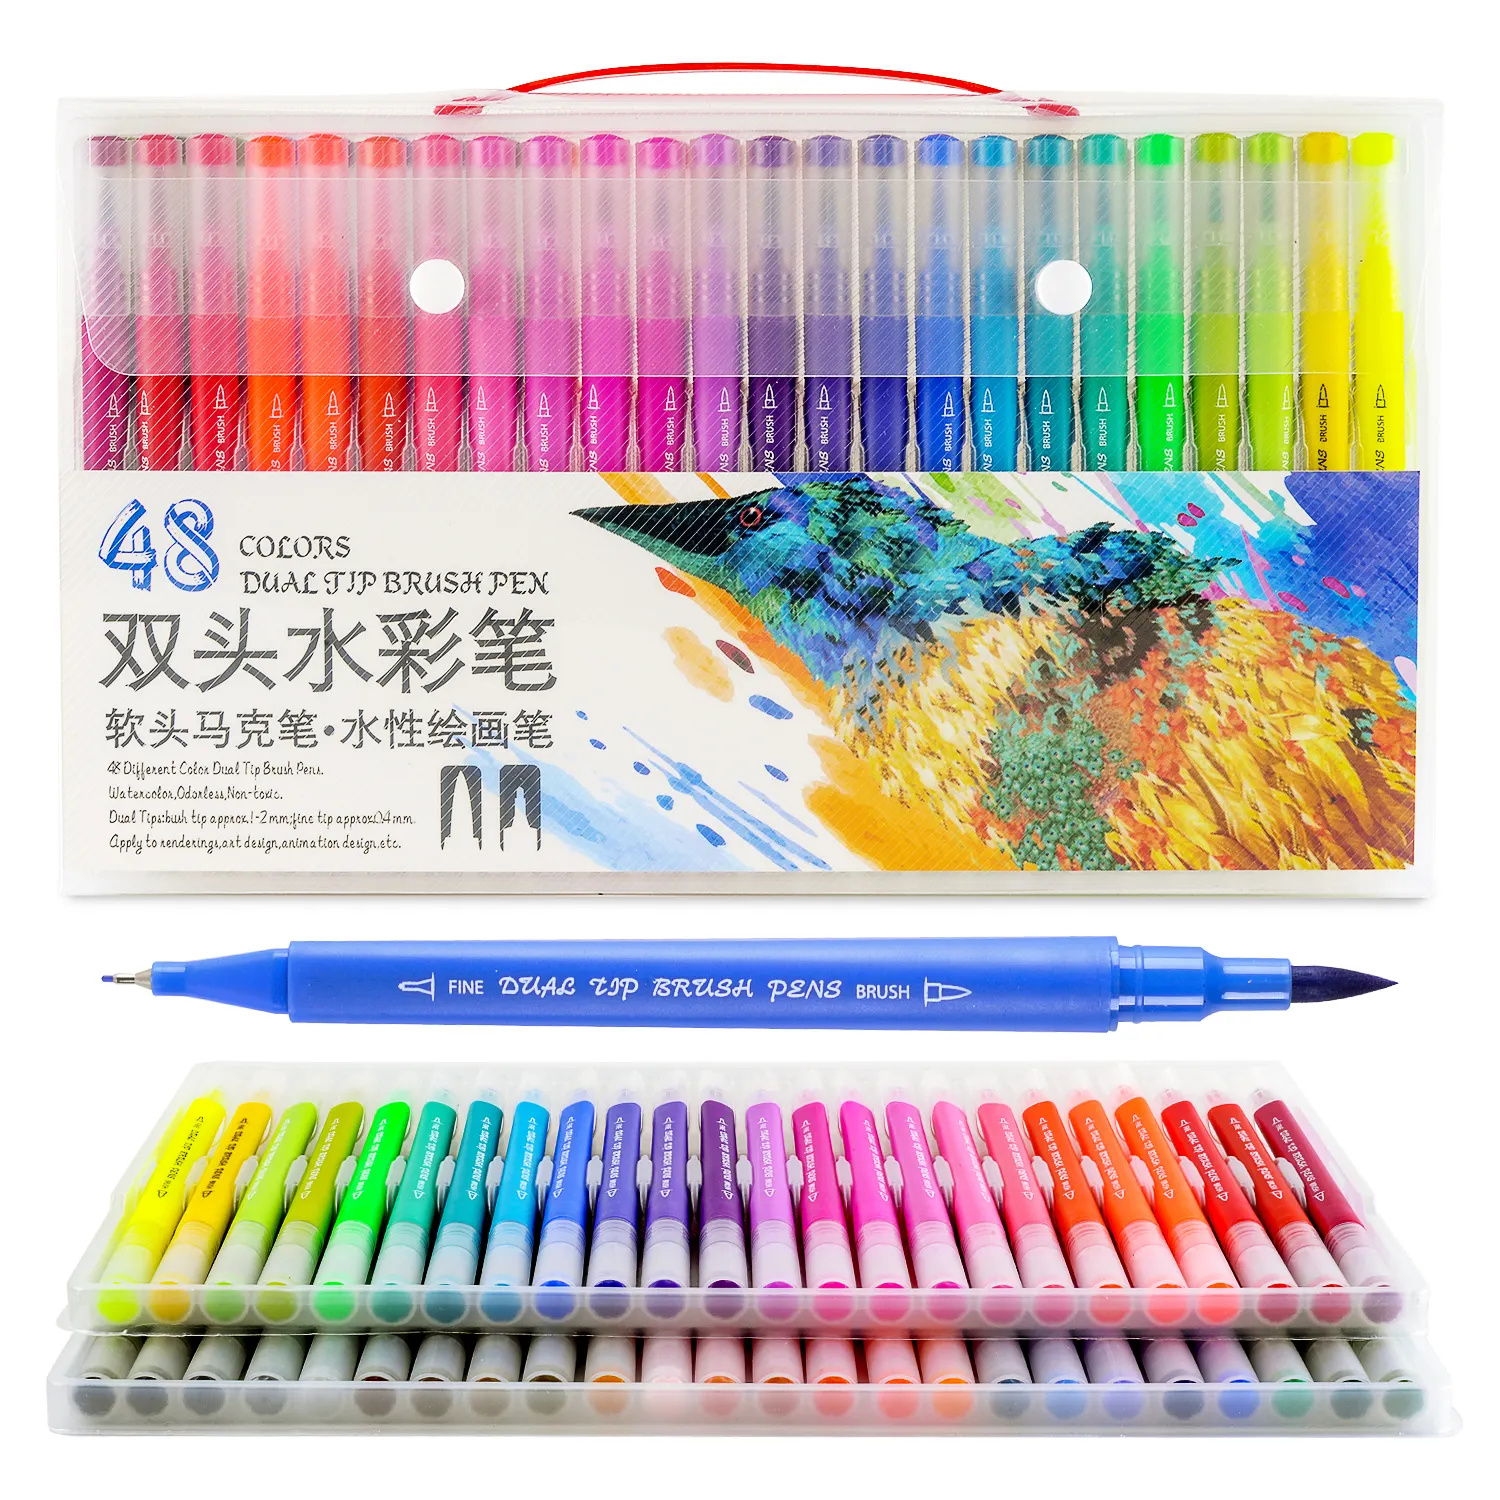 2019 Amazon Hot Selling 48 Colors Dual Tip Brush Set Art Markers Brush&Fineliner Tips With Custom Packaging